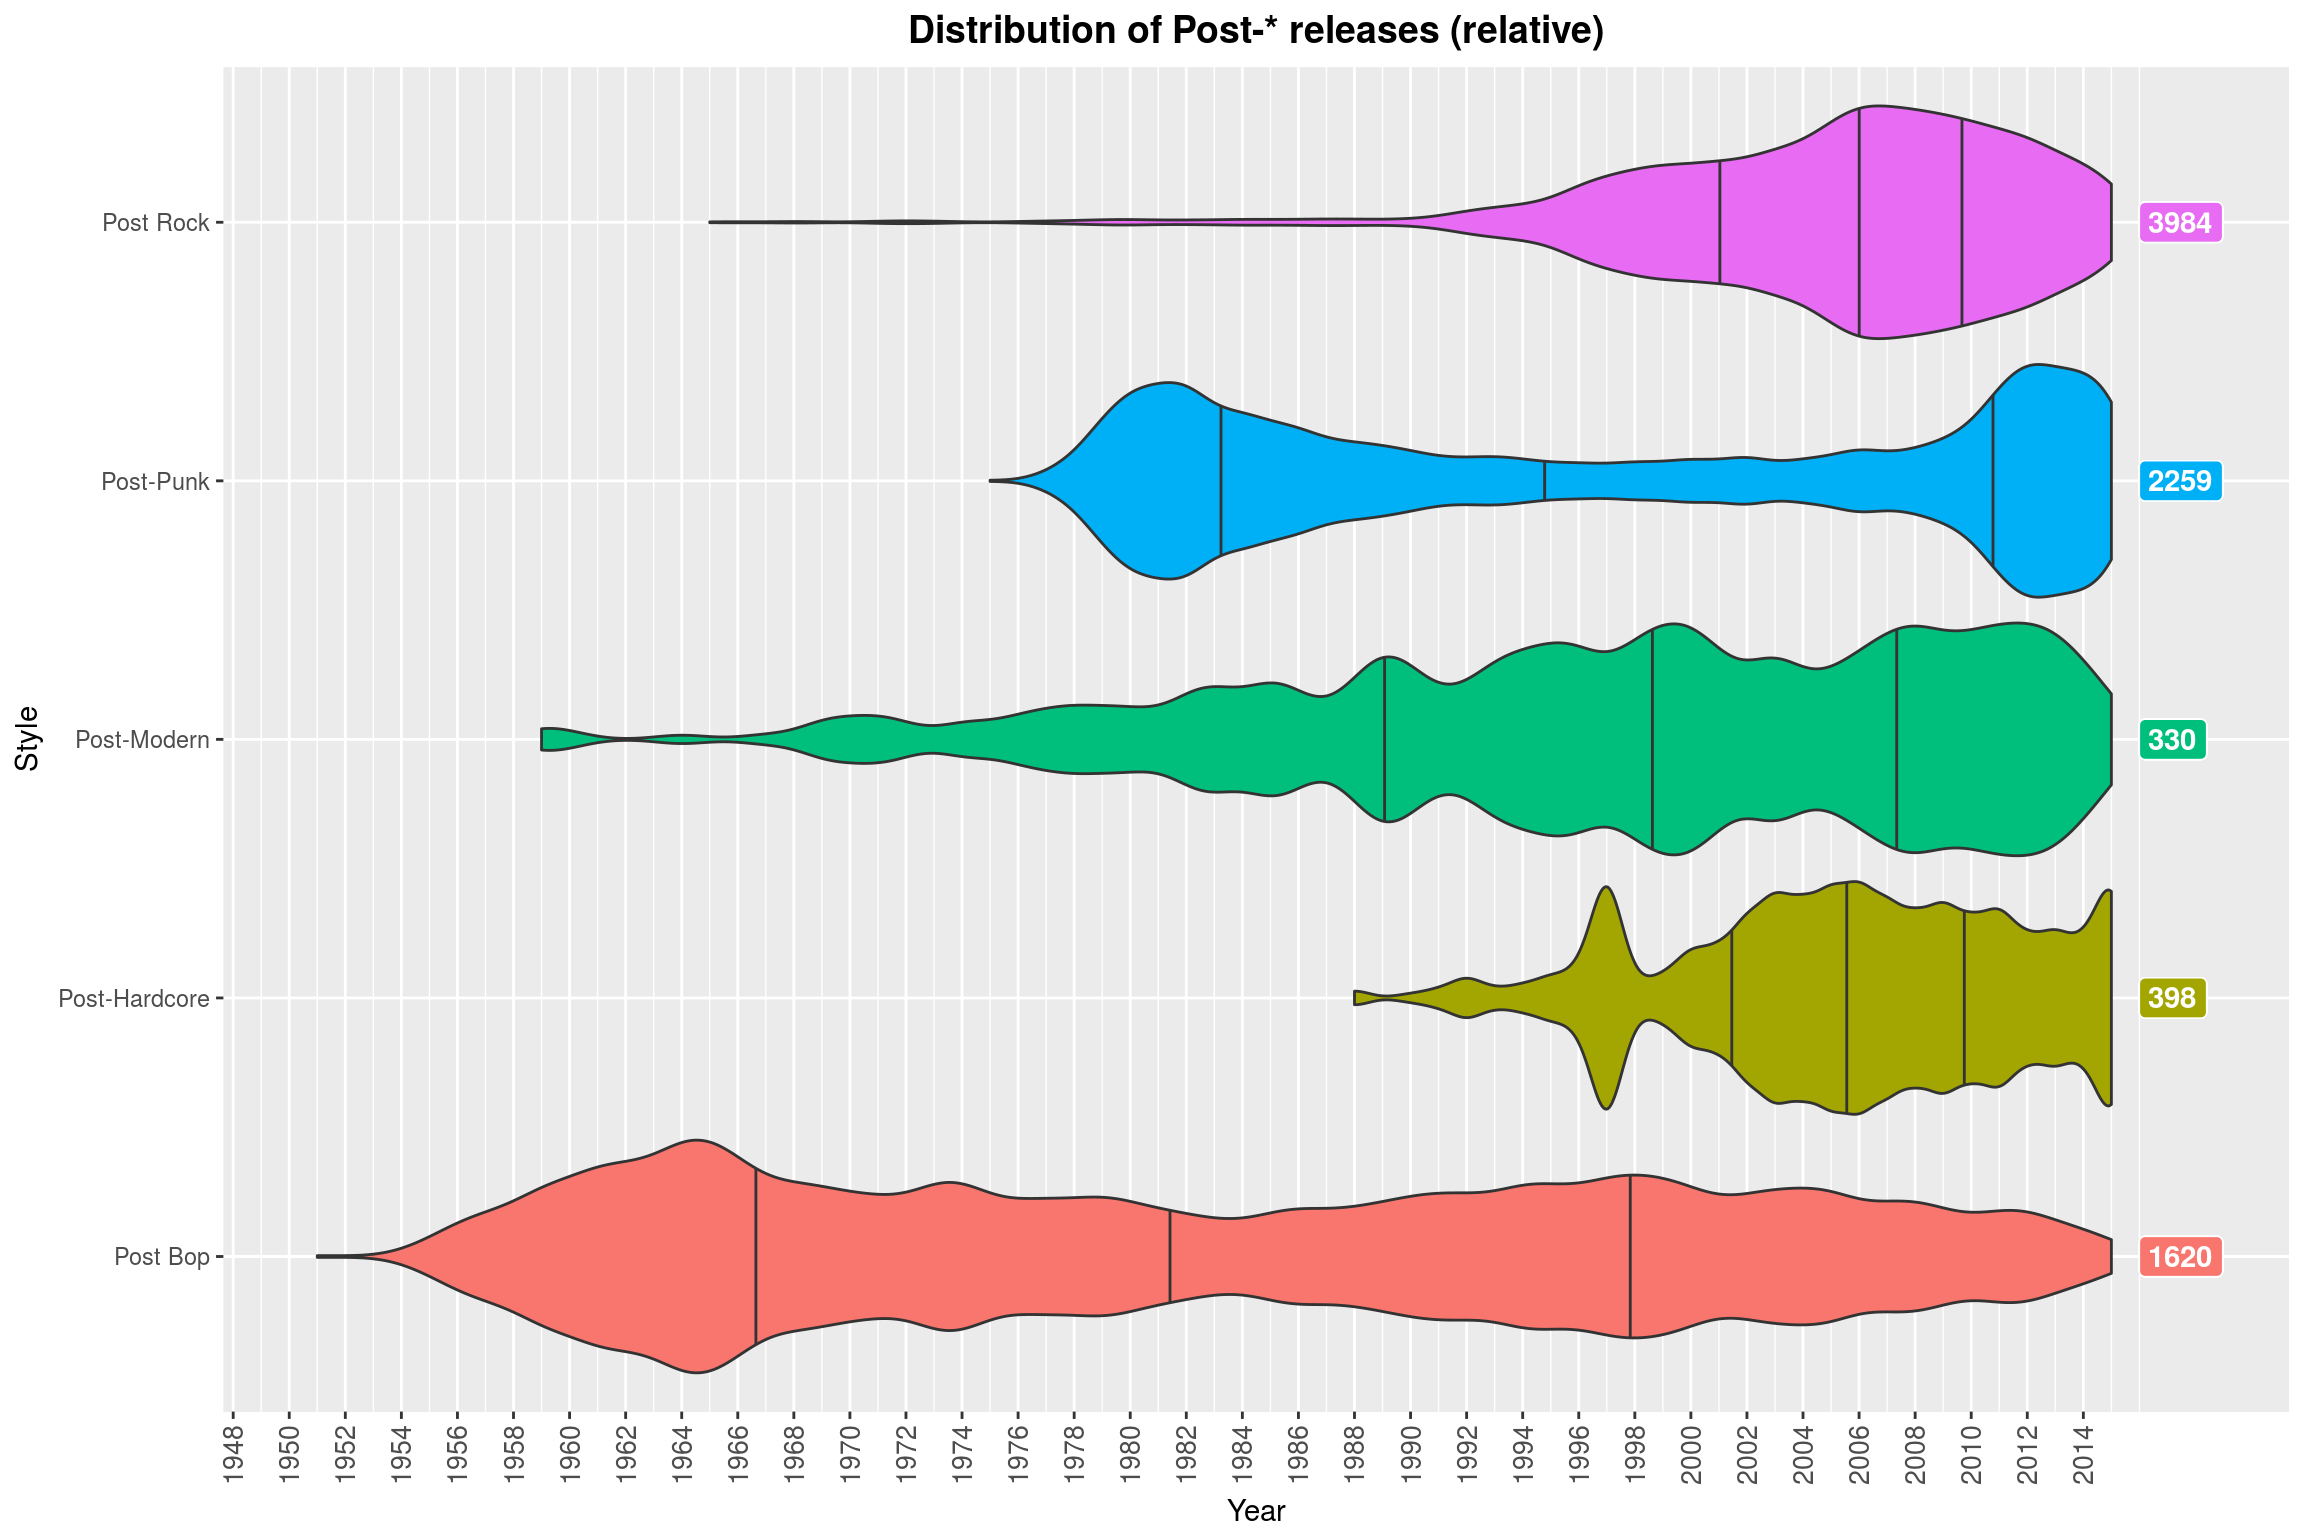 Distribution of Post-* releases (relative)